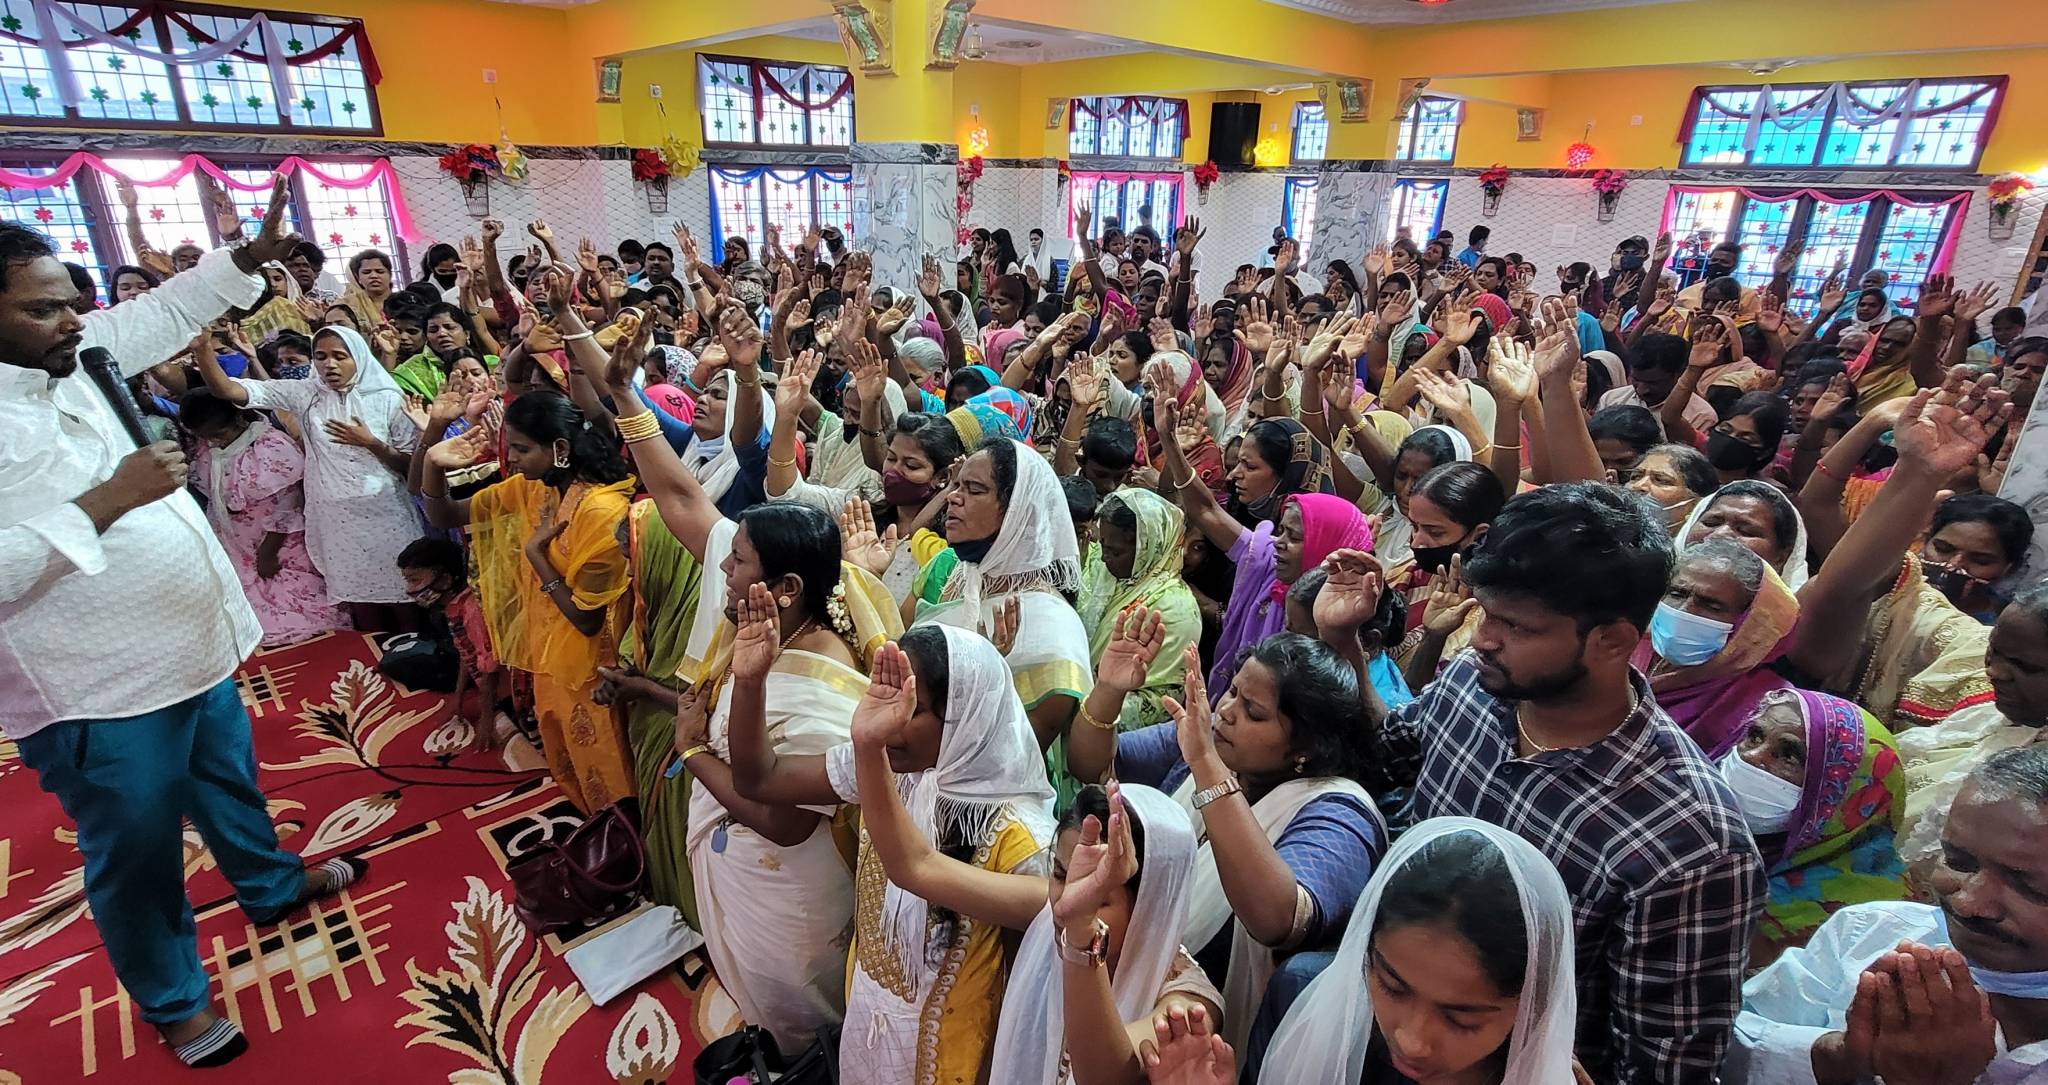 Abednego Leading a service of people with their hands raised. 